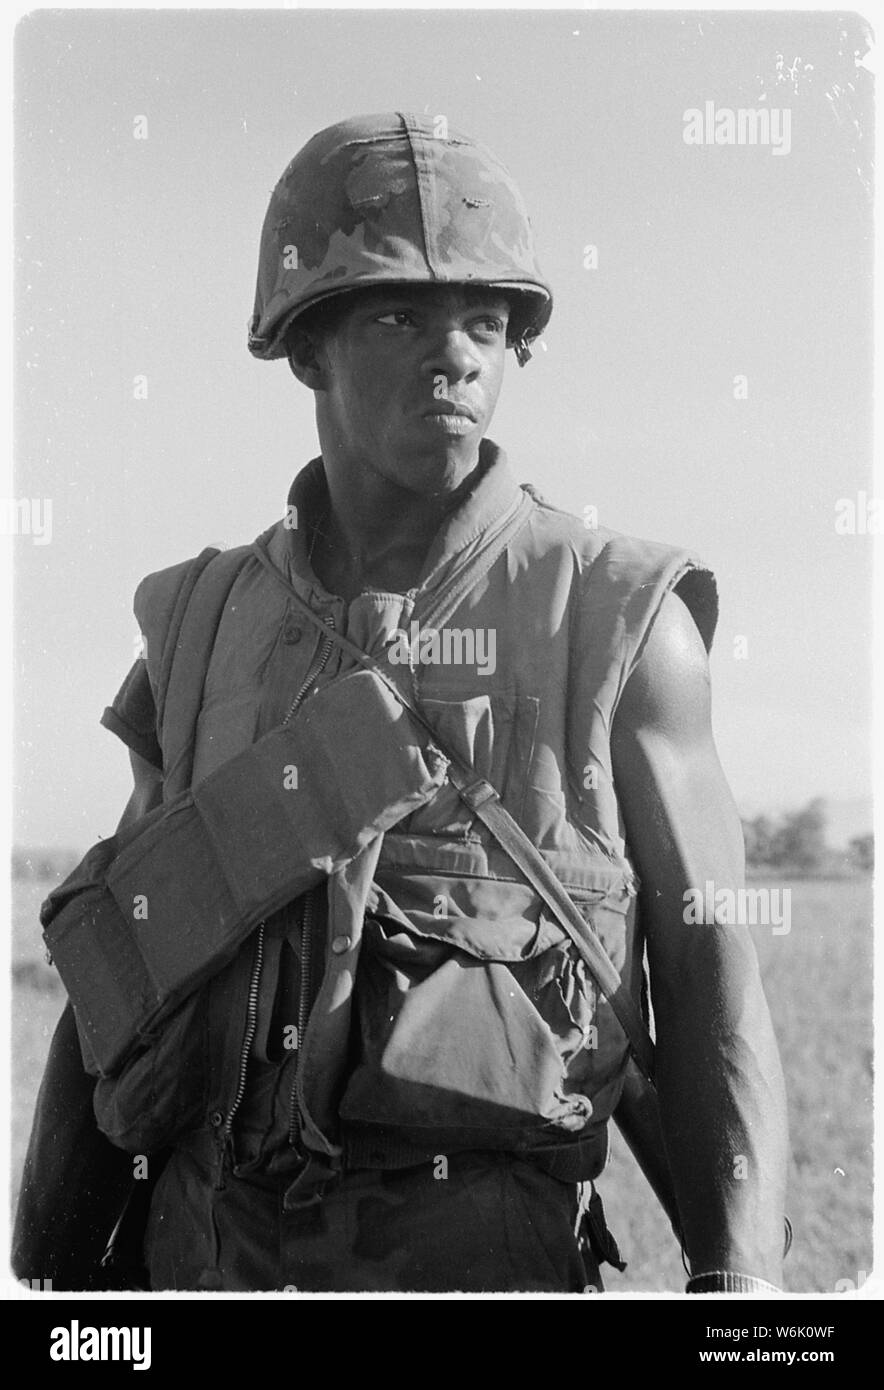 Photograph of Marines of Company I in Vietnam; Scope and content:  Original caption: Vietnam....Marines of Company I, 3rd Battalion, 1st Marine Regiment, Cross an open field while on patrol 8 miles south of the city of Da Nang. Stock Photo